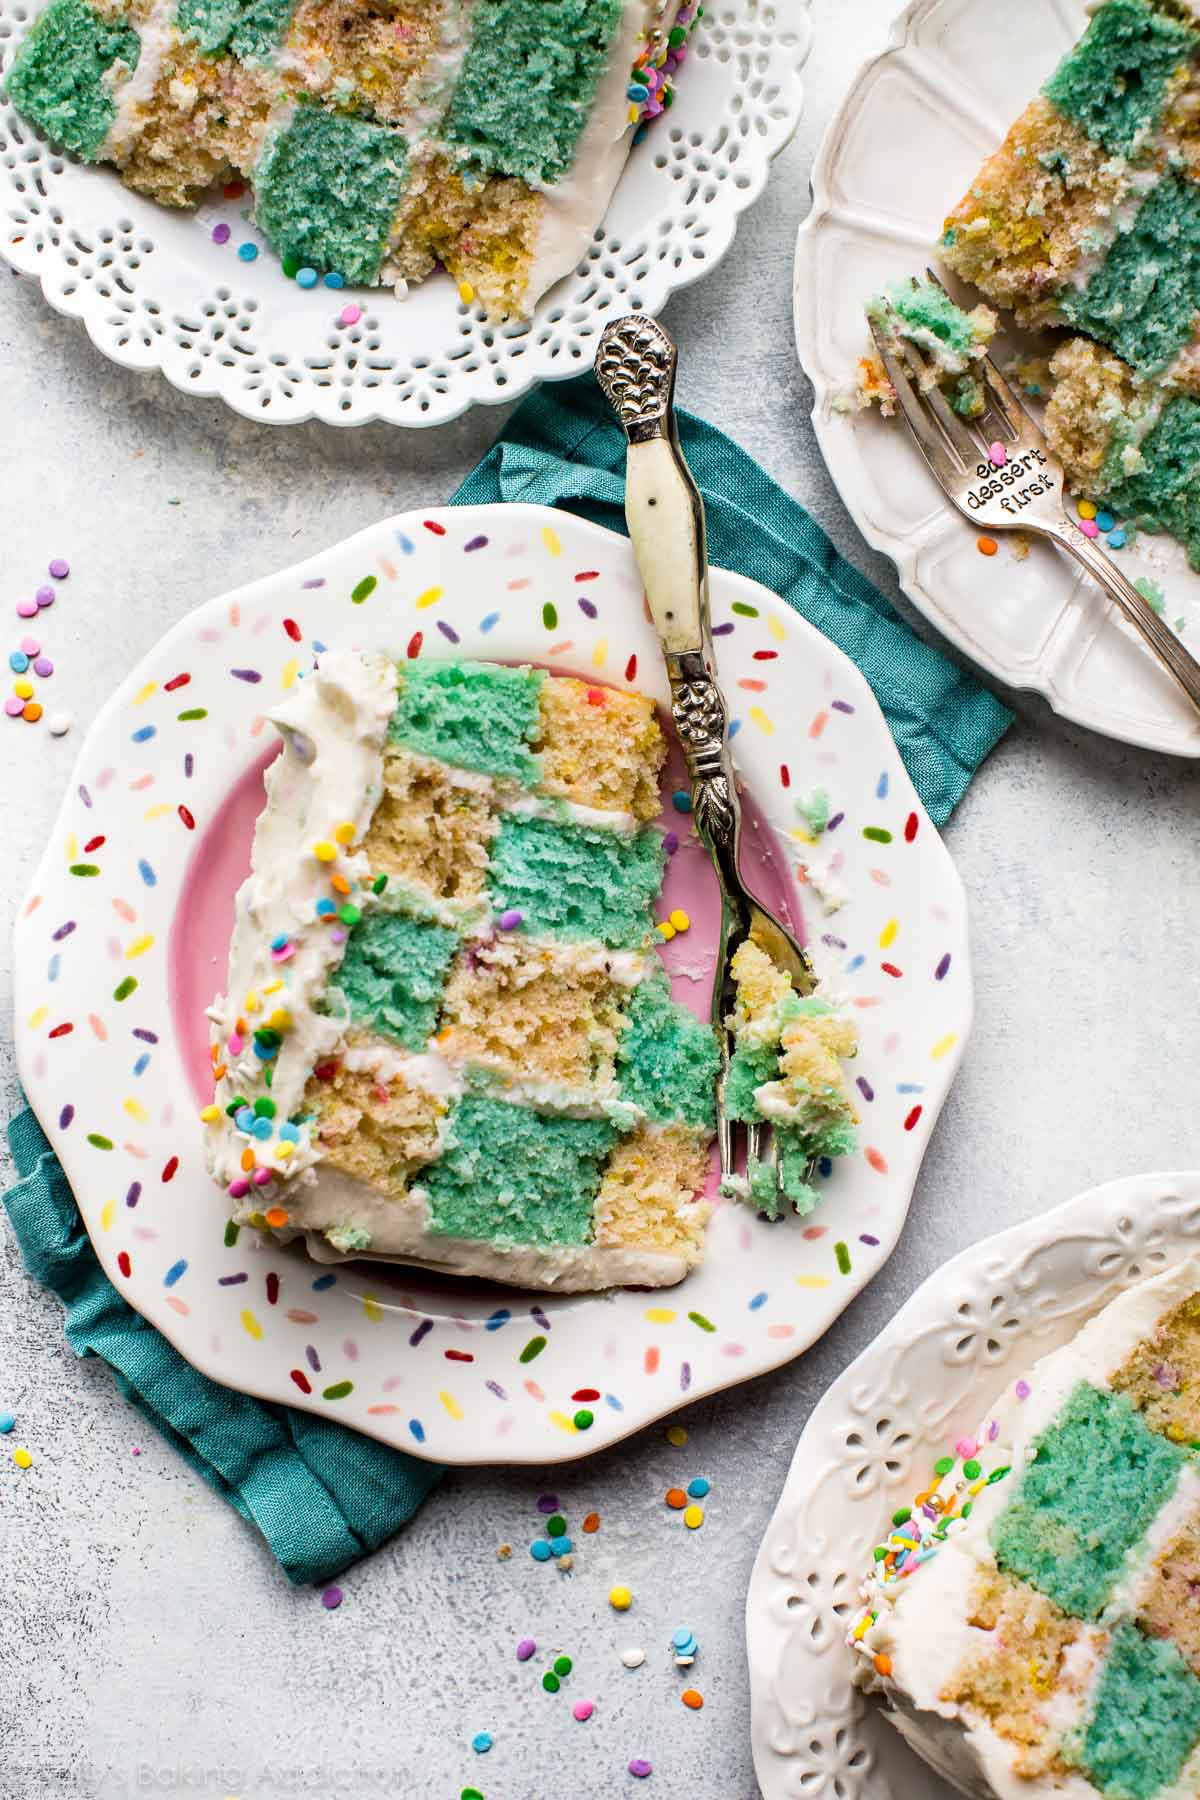 slices of checkerboard cake on plates with forks